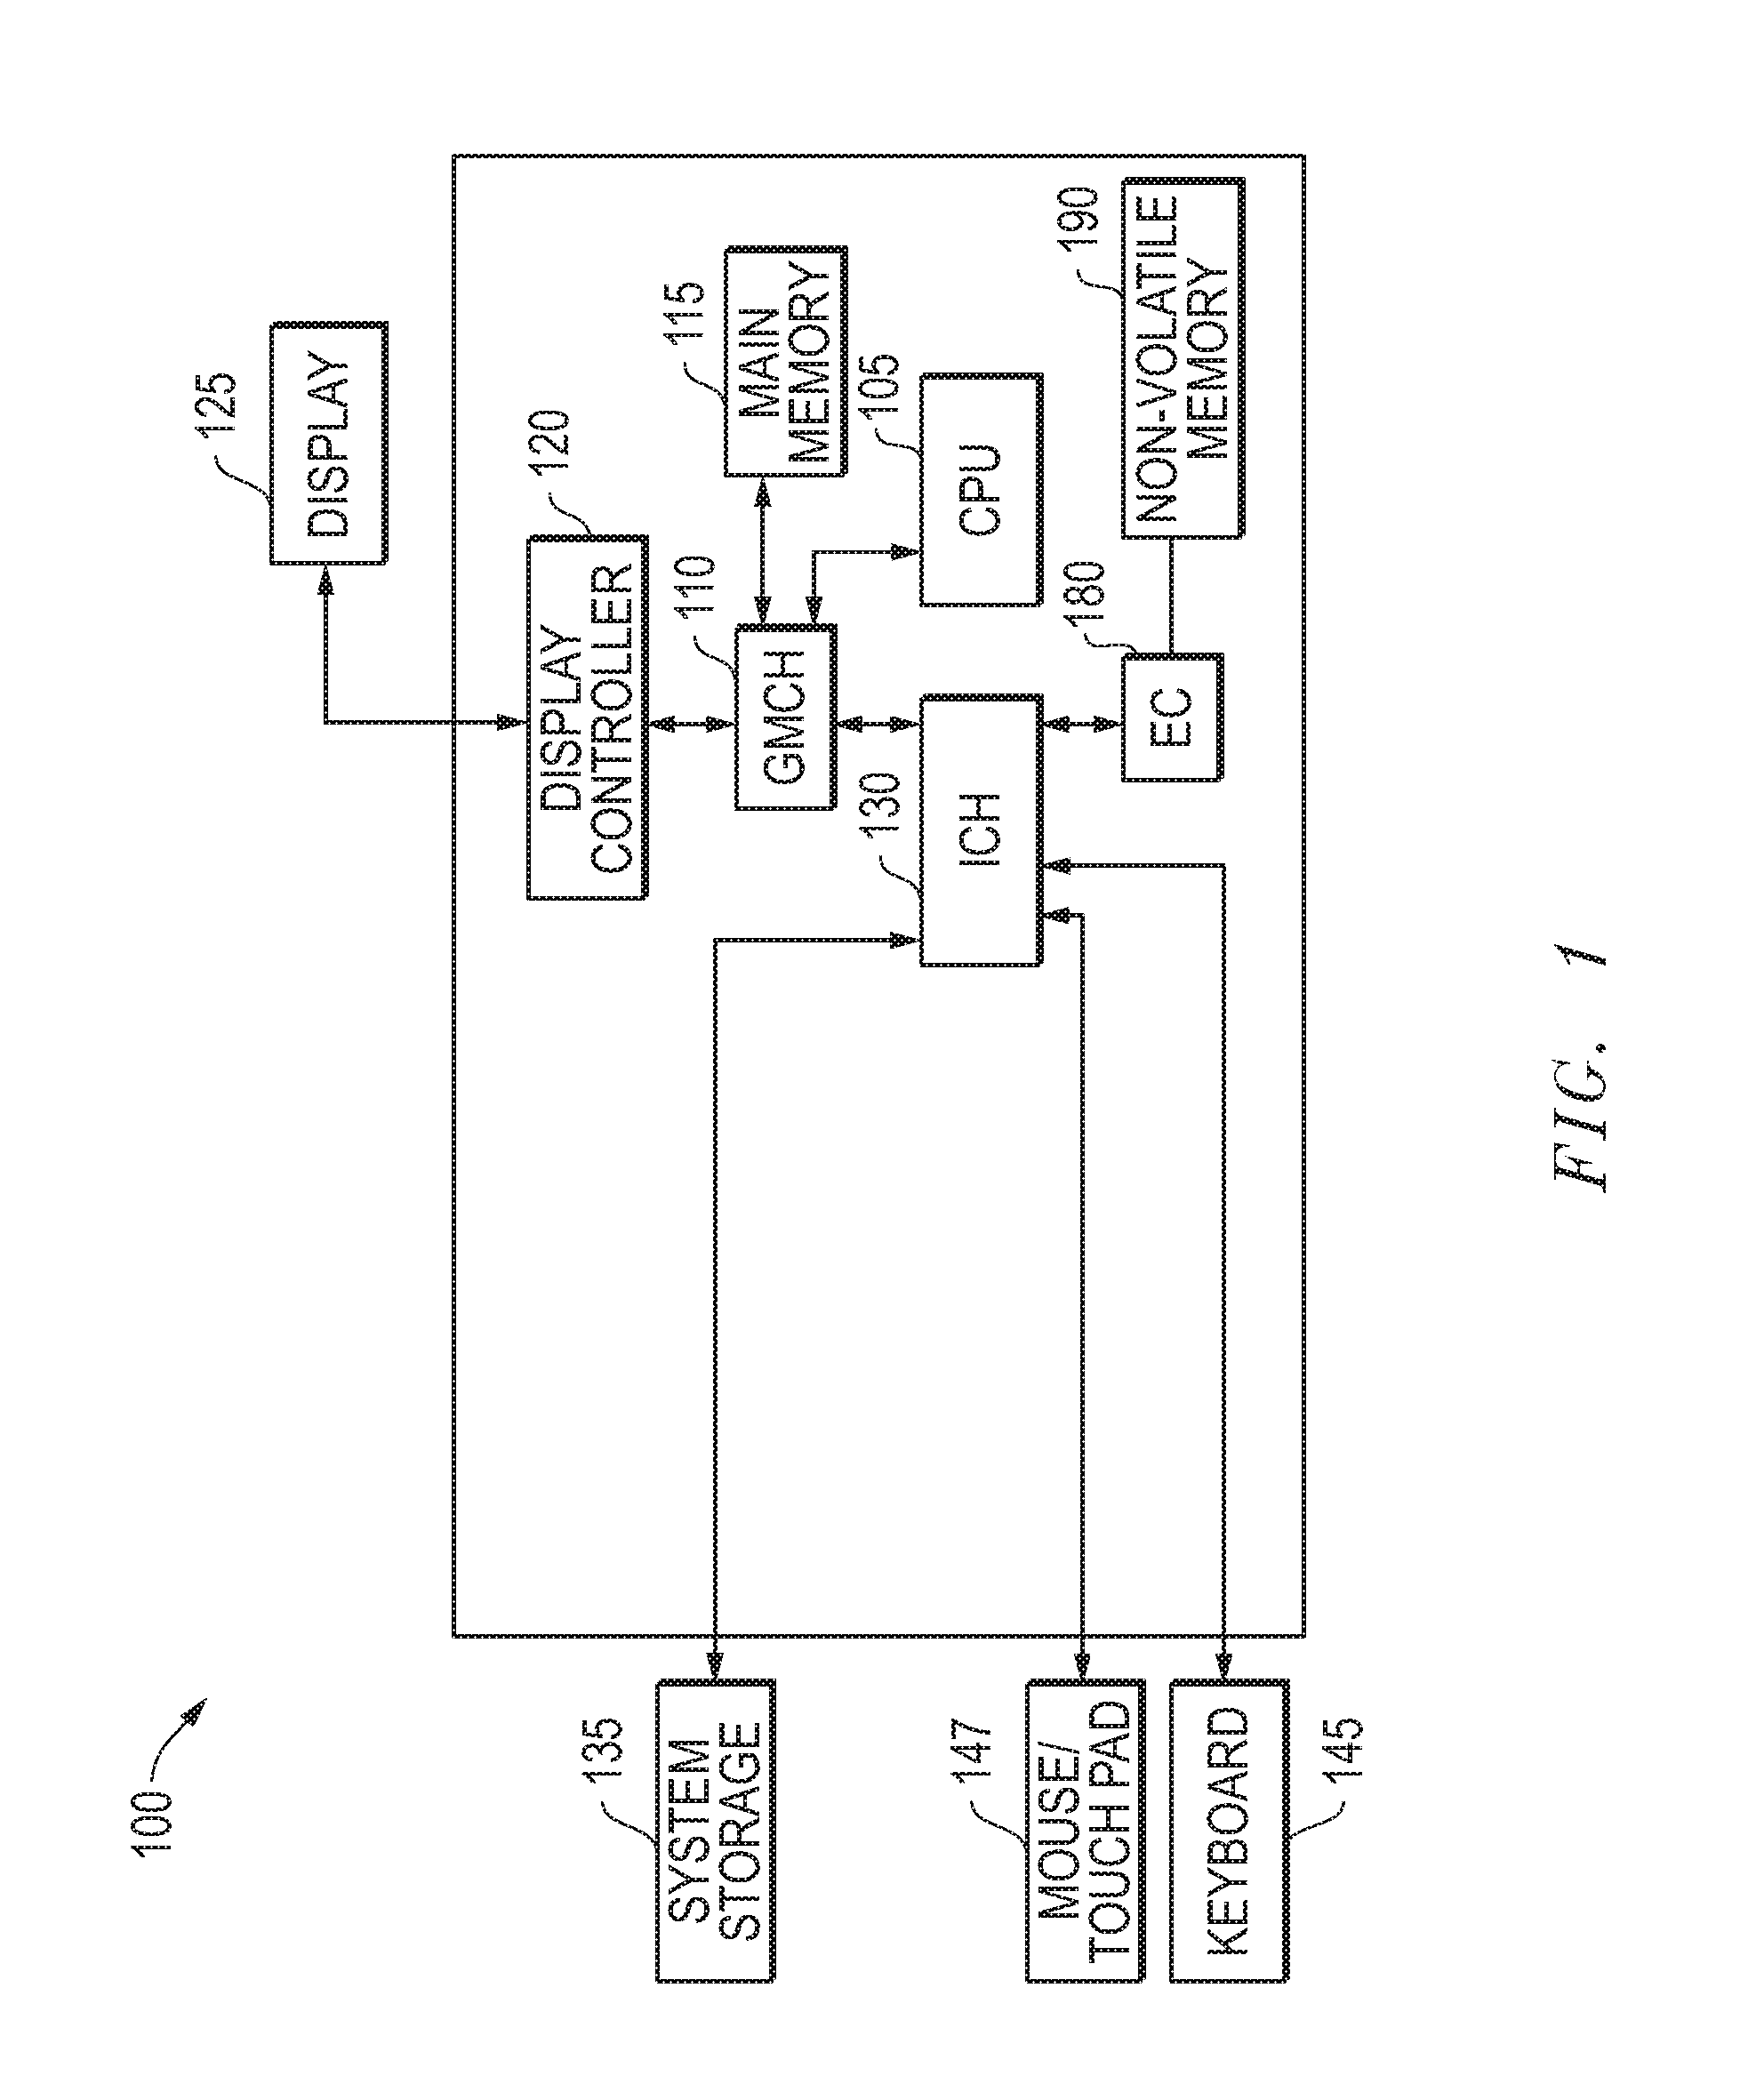 Systems and methods for facilitating activation of operating systems